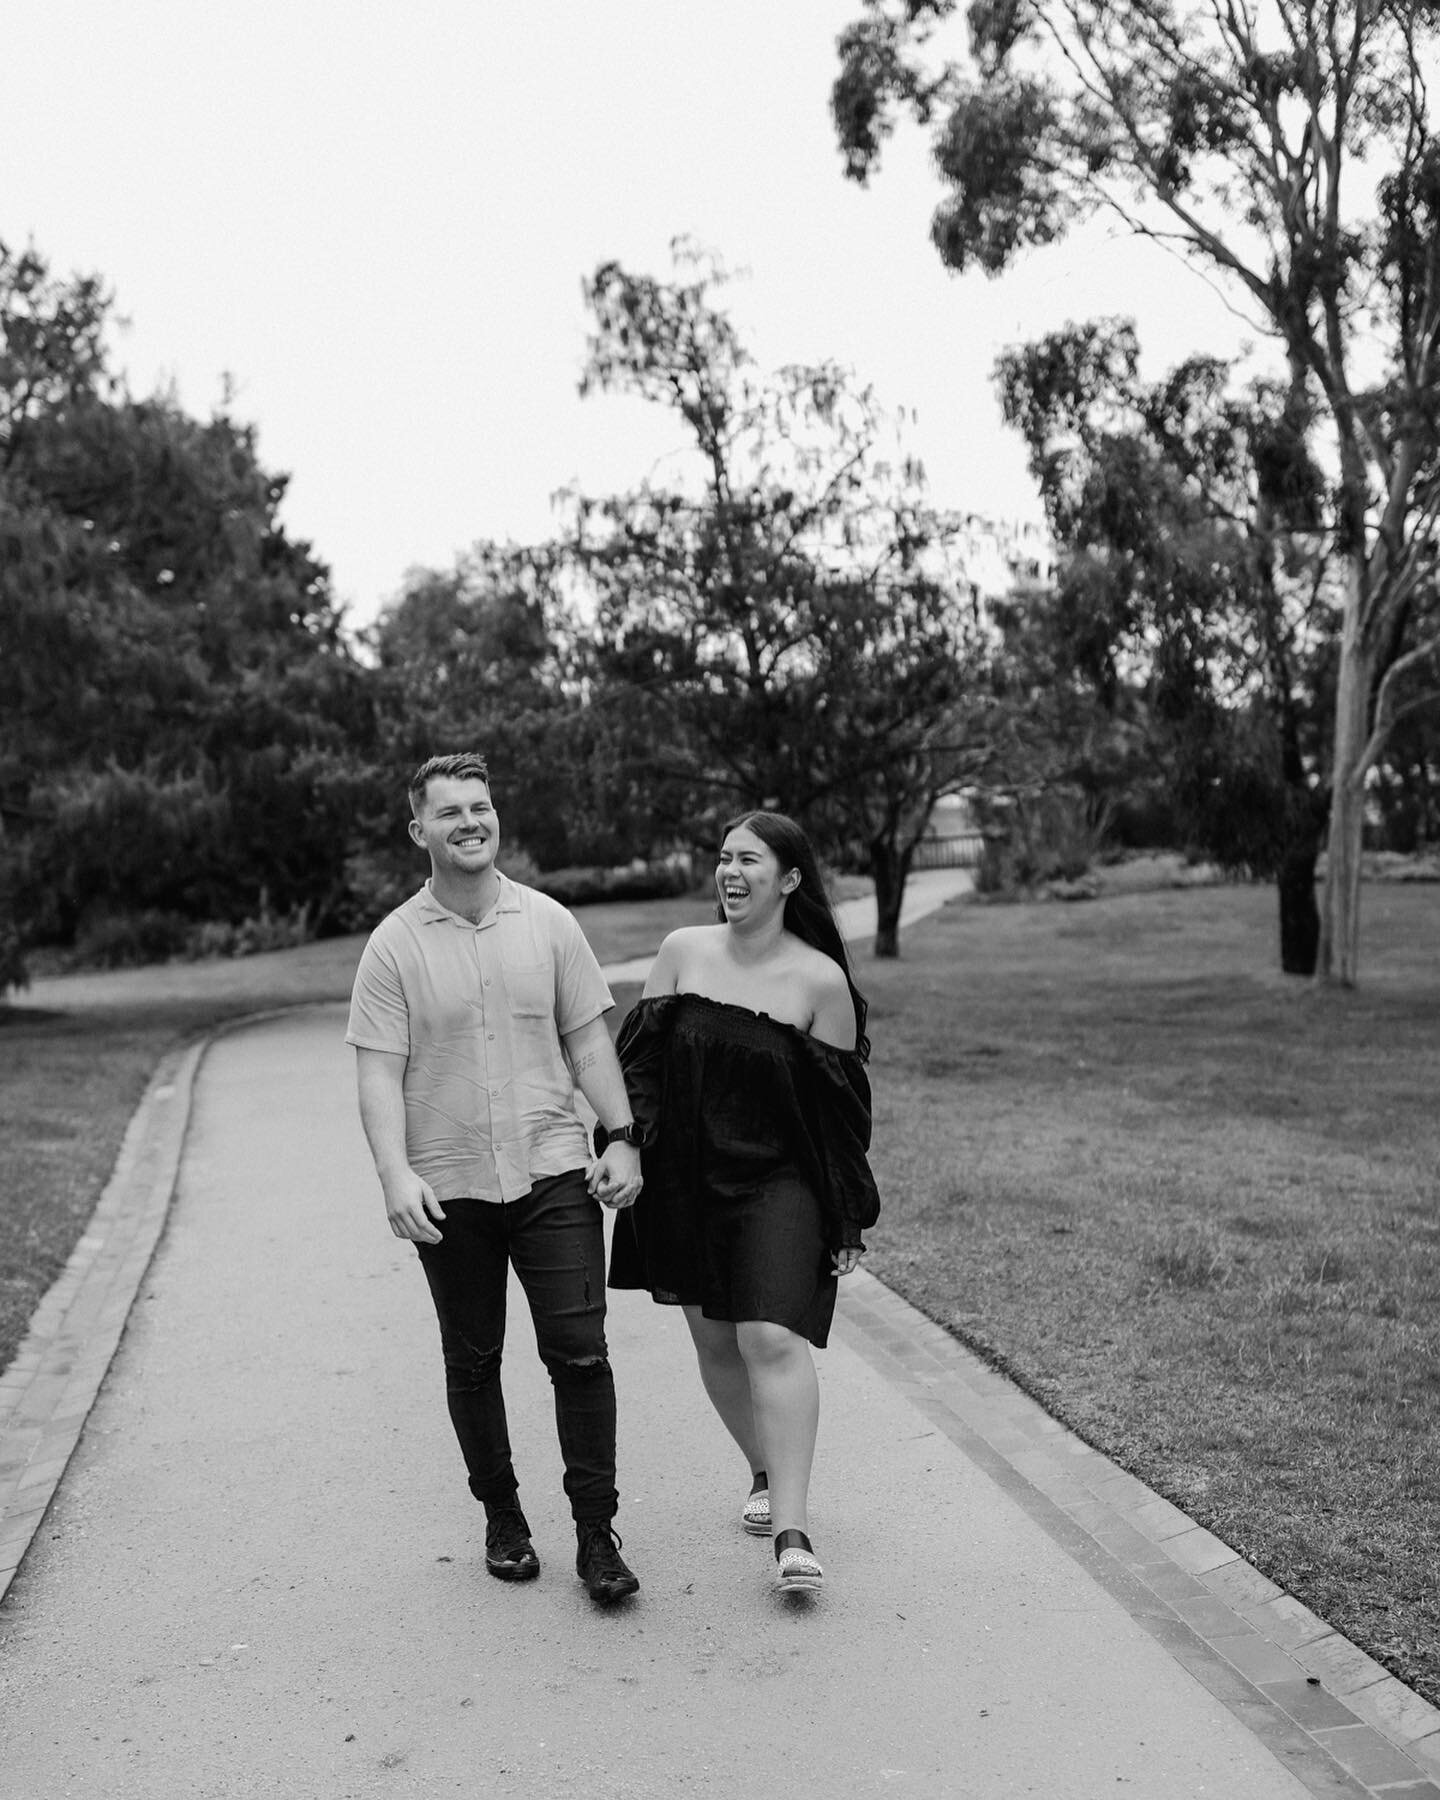 Last Friday in between the torrential downpours of rain, Celeste &amp; Aaron took a stroll with me through the park to chat all about their upcoming wedding in November 💜